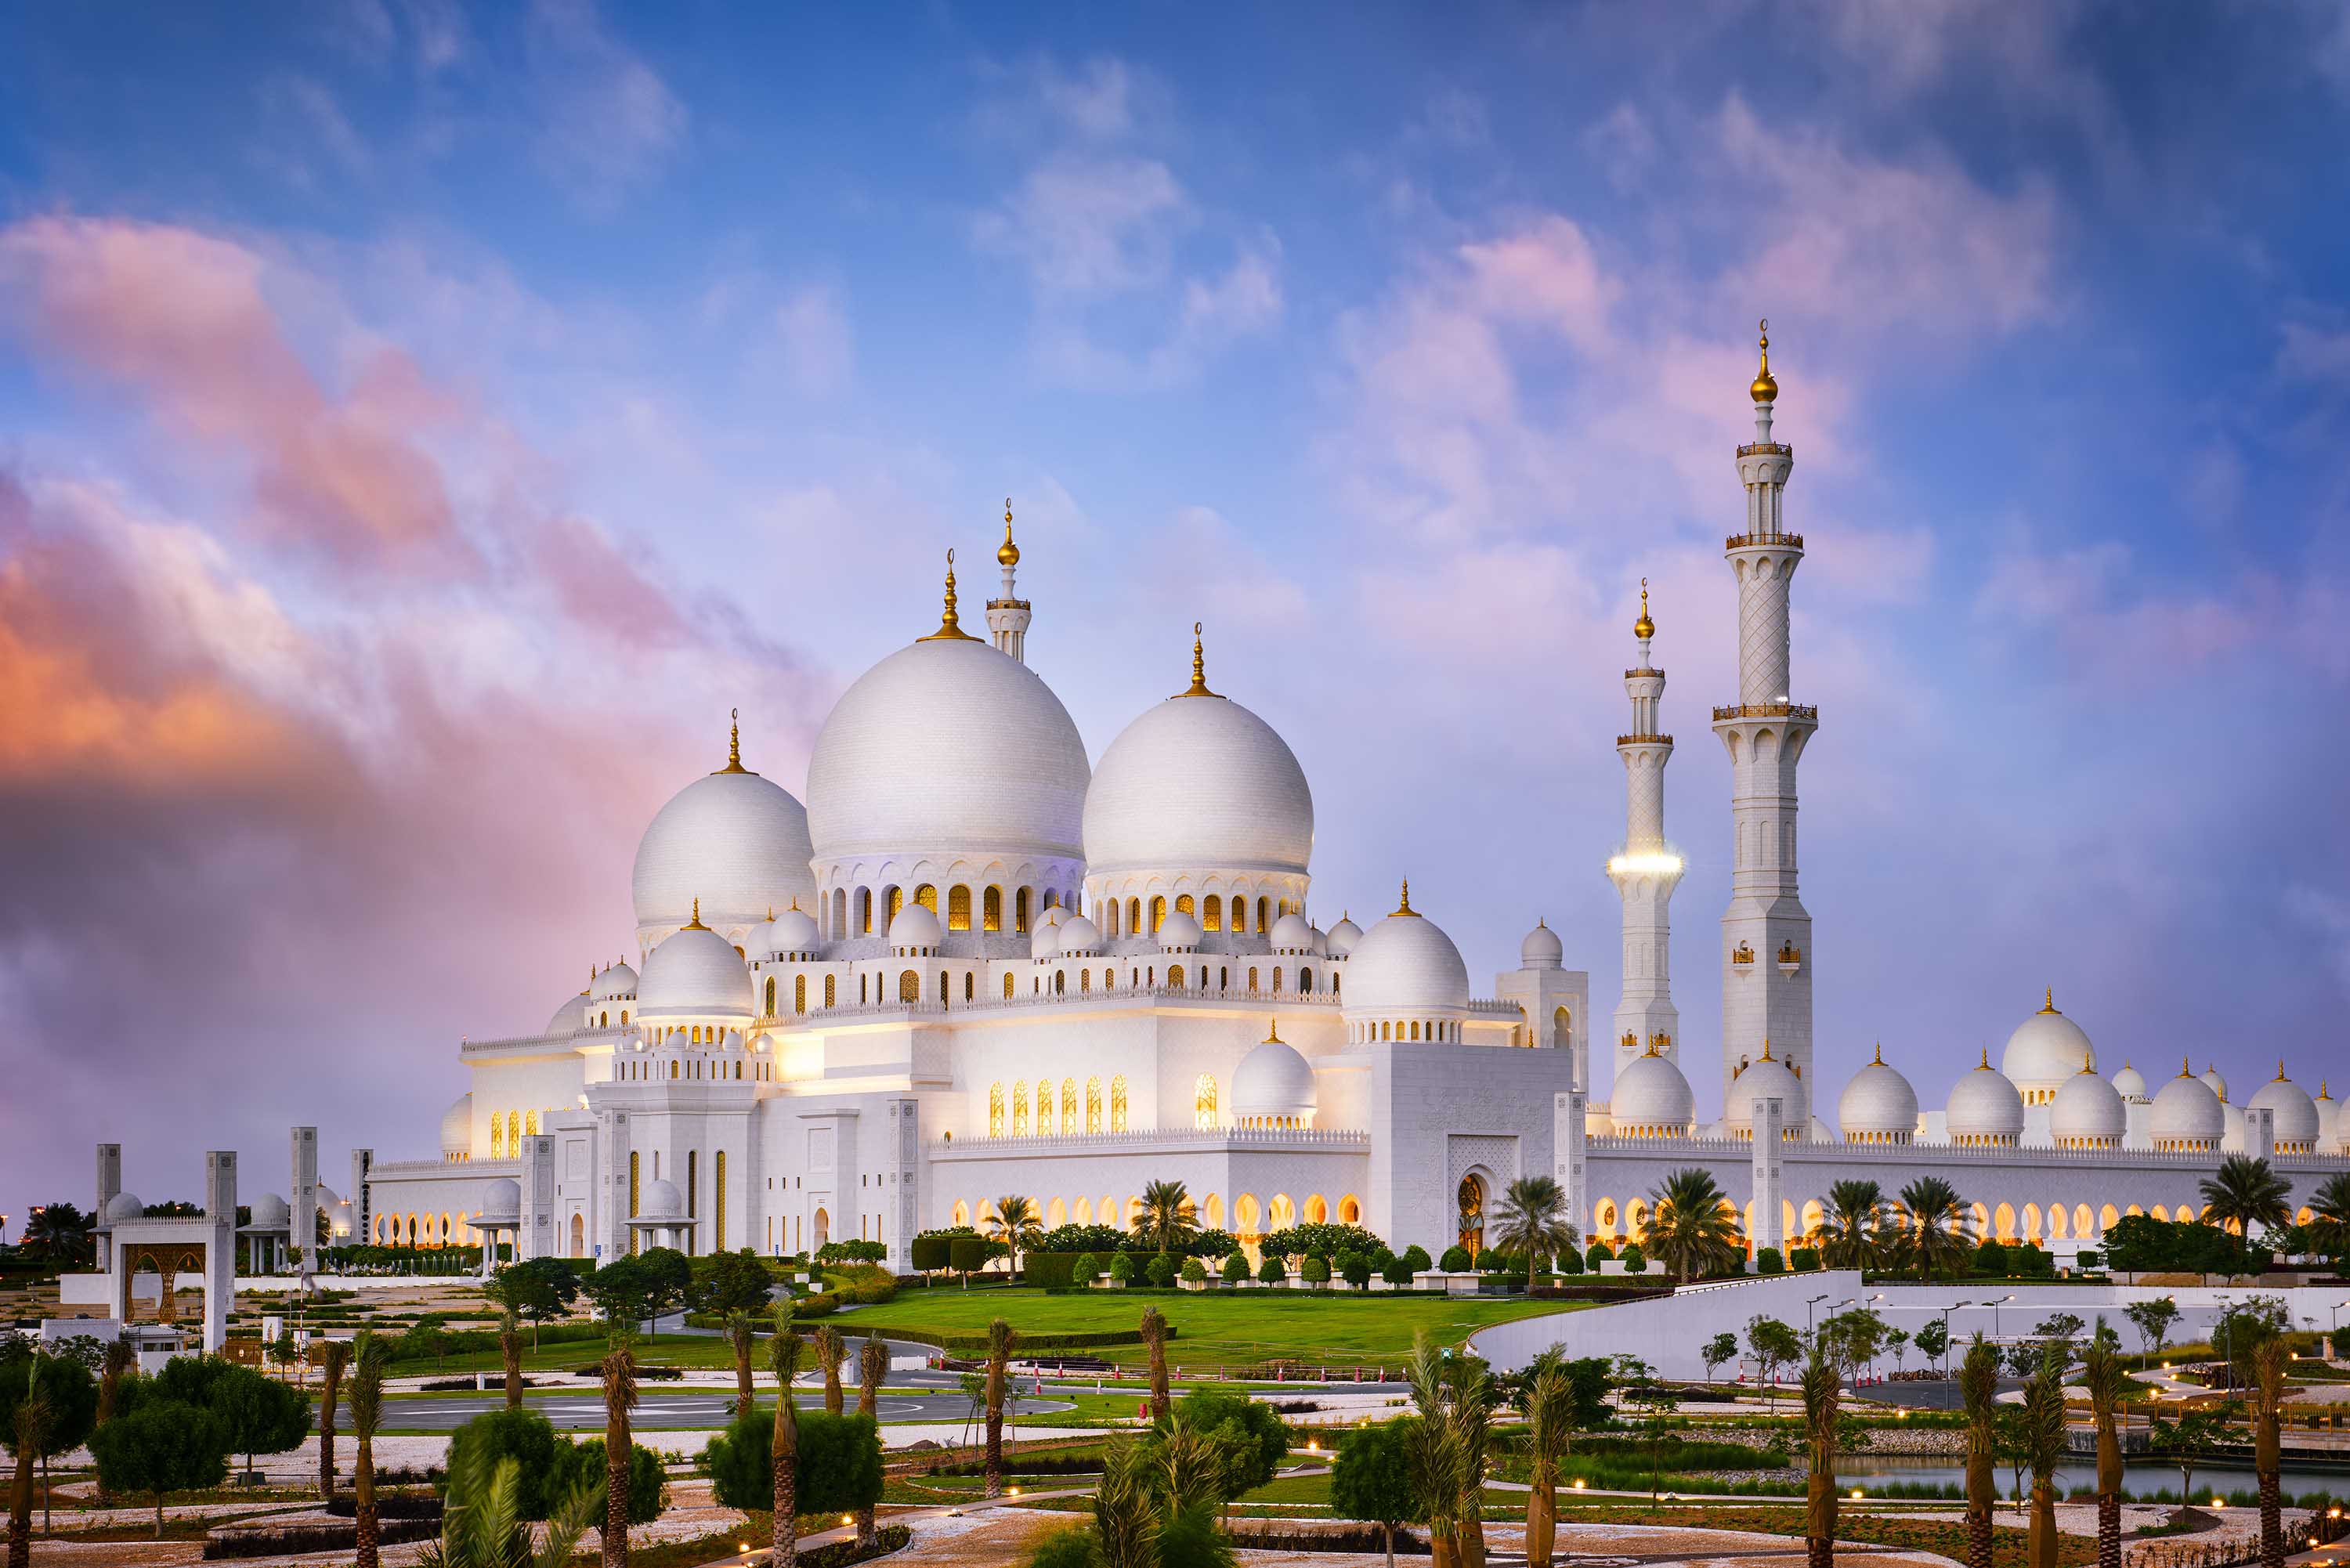 Sheikh Zayed Grand Mosque A Leading Destination For Visitors Of Major International Events Hosted by UAE